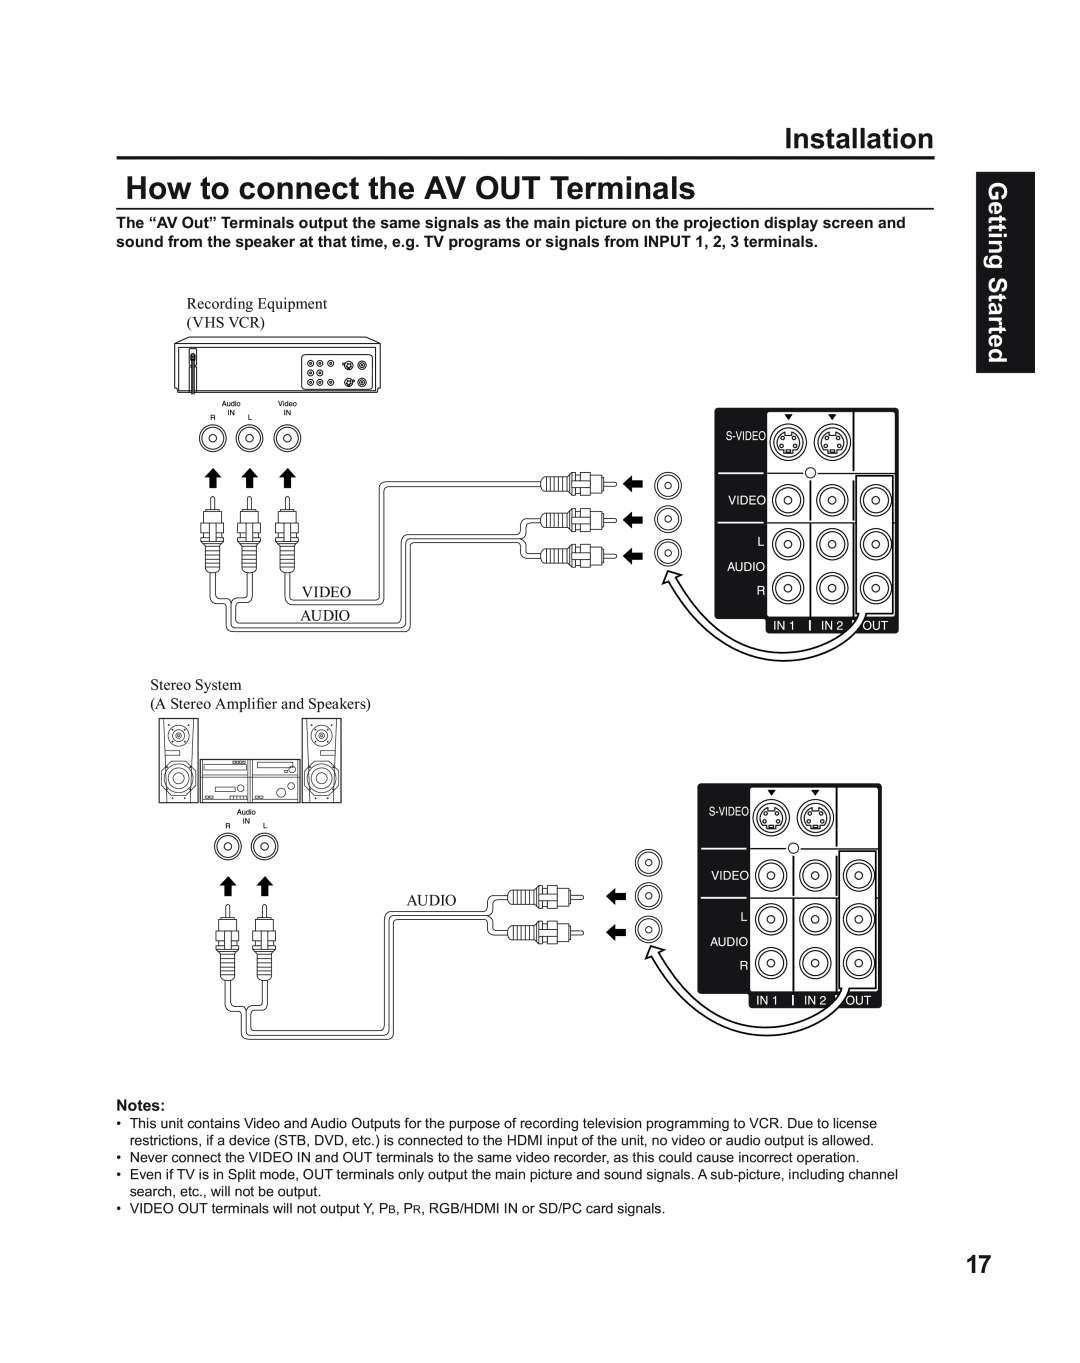 Panasonic PT-60LC14, PT-43LC14, PT-50LC14 manual How to connect the AV OUT Terminals, Installation, Getting Started 